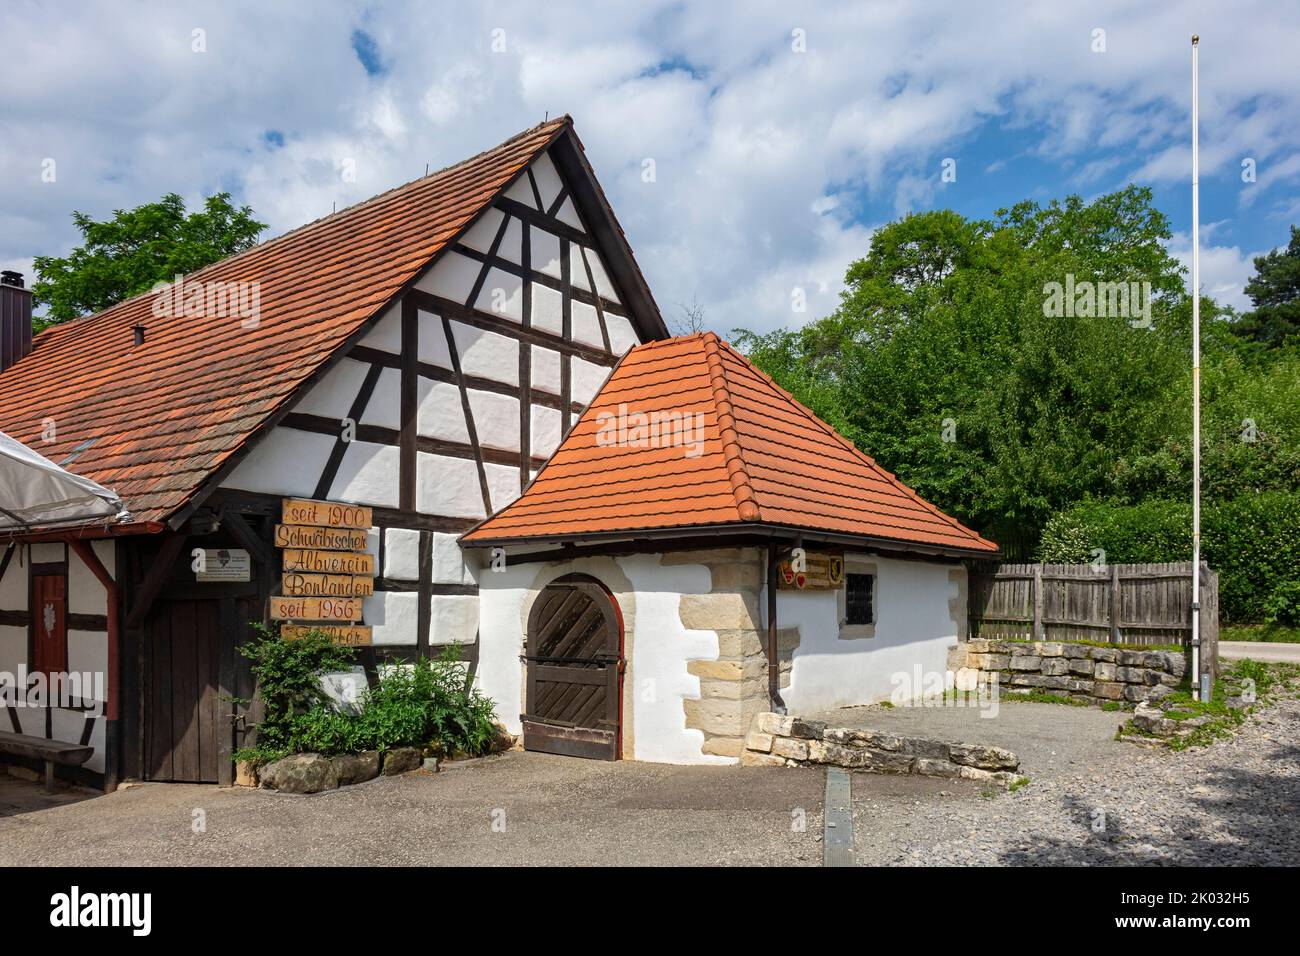 The wine press on the Uhlberg, built in 1718, is now used as the clubhouse of the local Schwäbischer Albverein Bonlanden group. Stock Photo